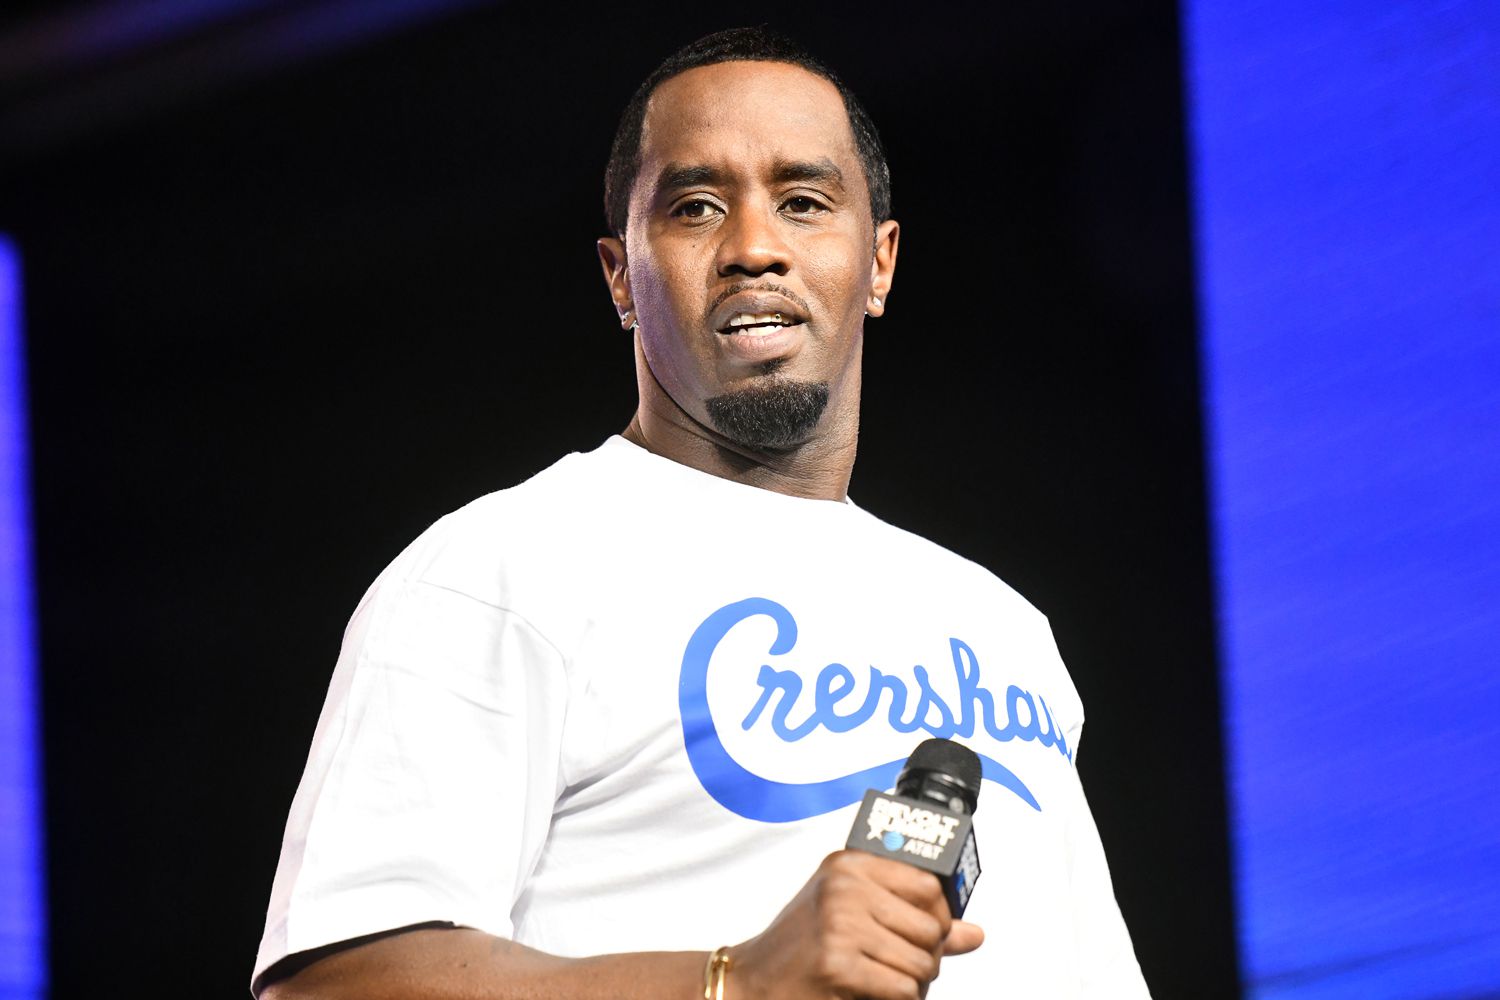 Rapper Sean 'Diddy' Combs attends the REVOLT & AT&T Summit on October 25, 2019 in Los Angeles, California